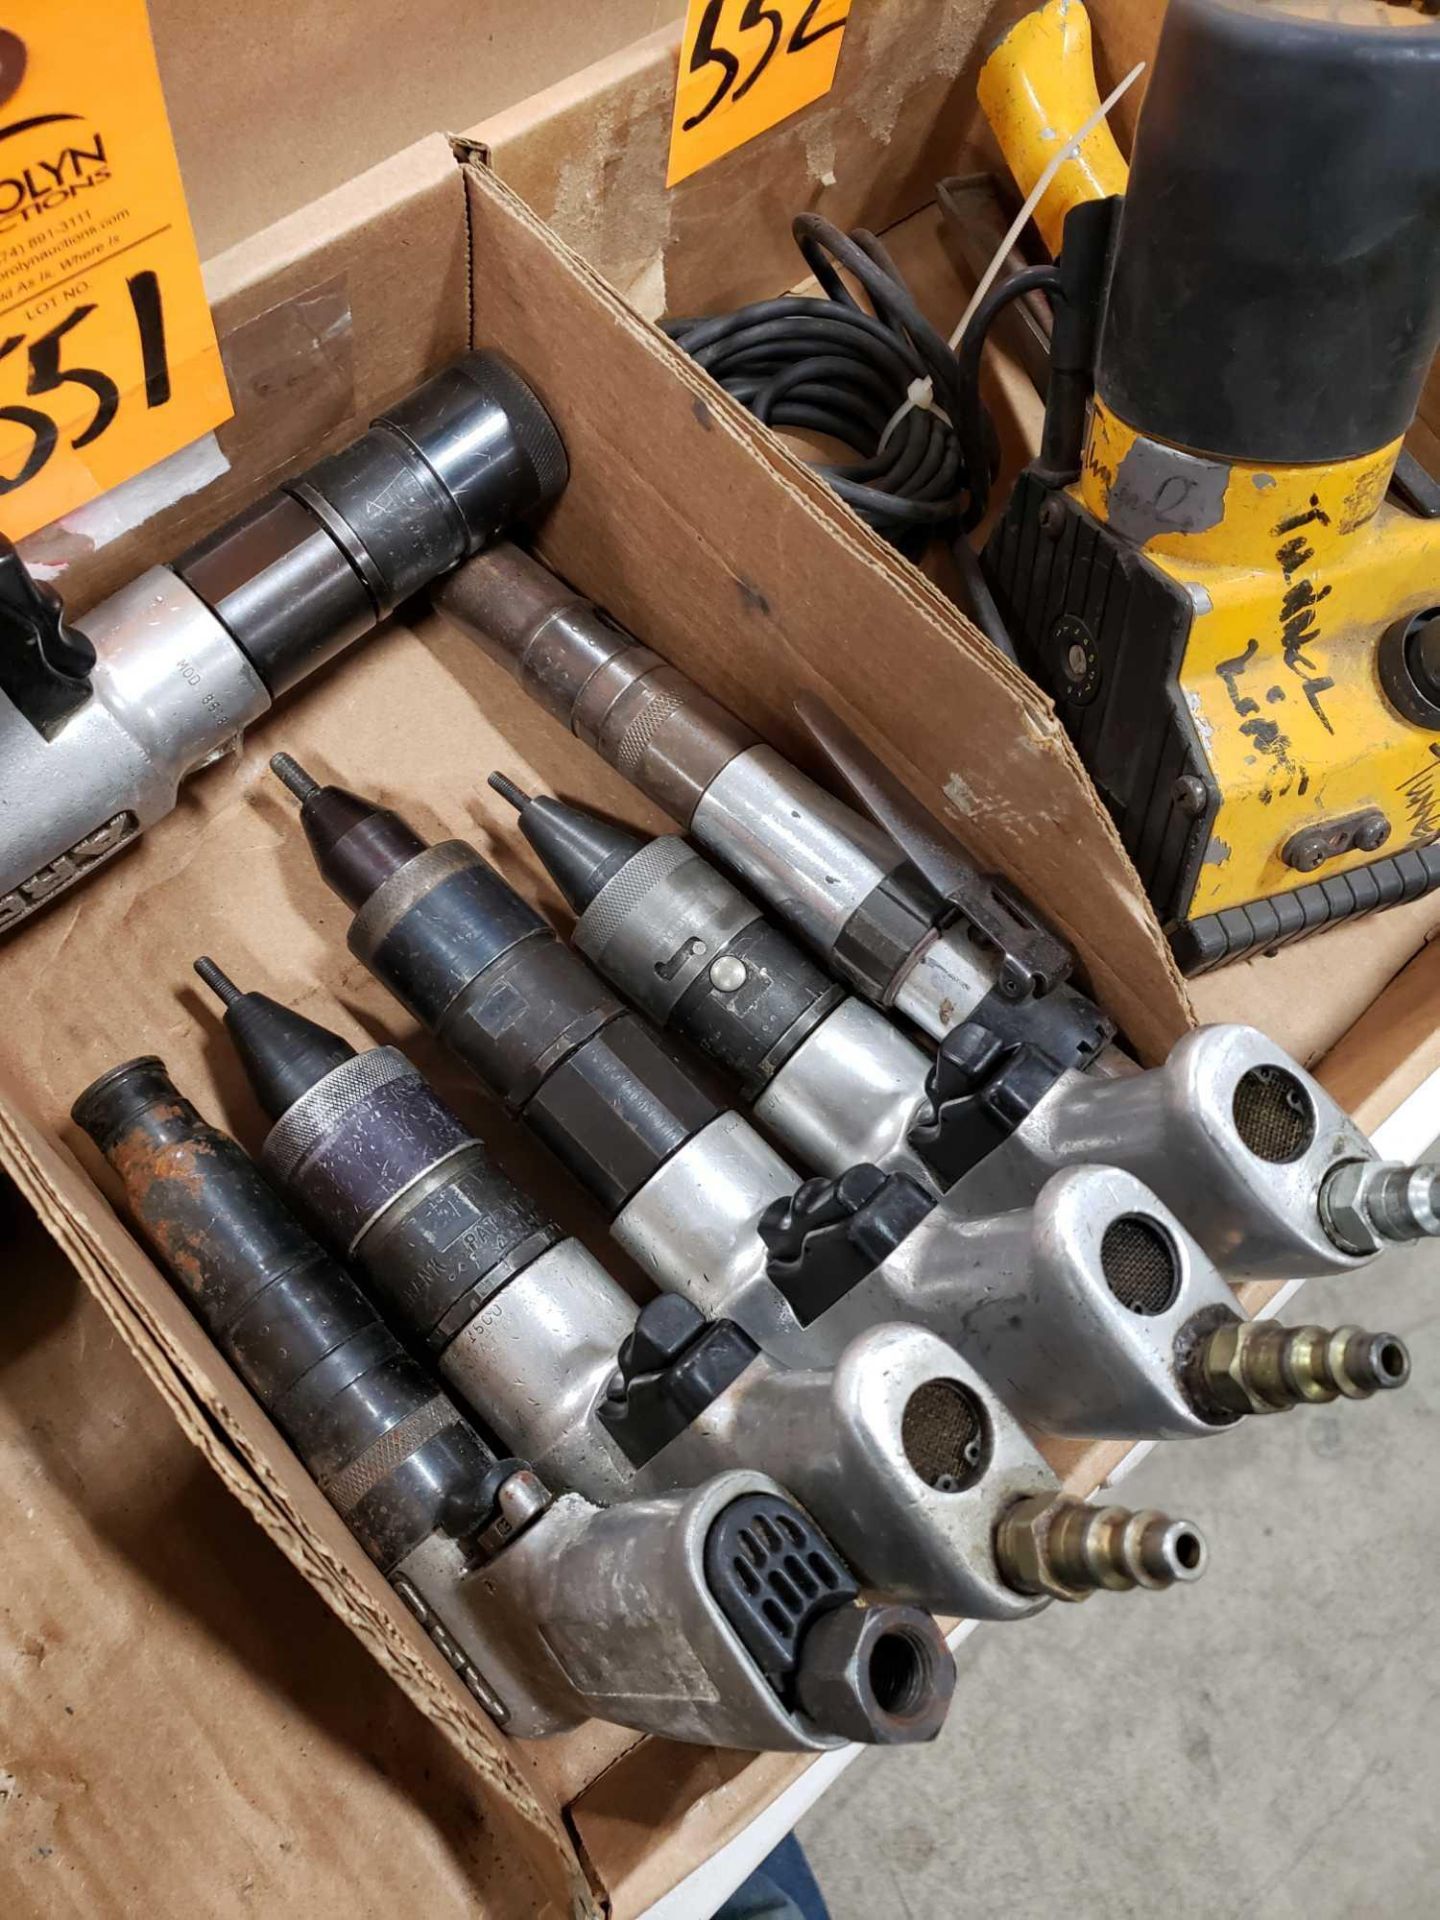 Qty 6 - Assorted ARO pneumatic tools. - Image 3 of 3